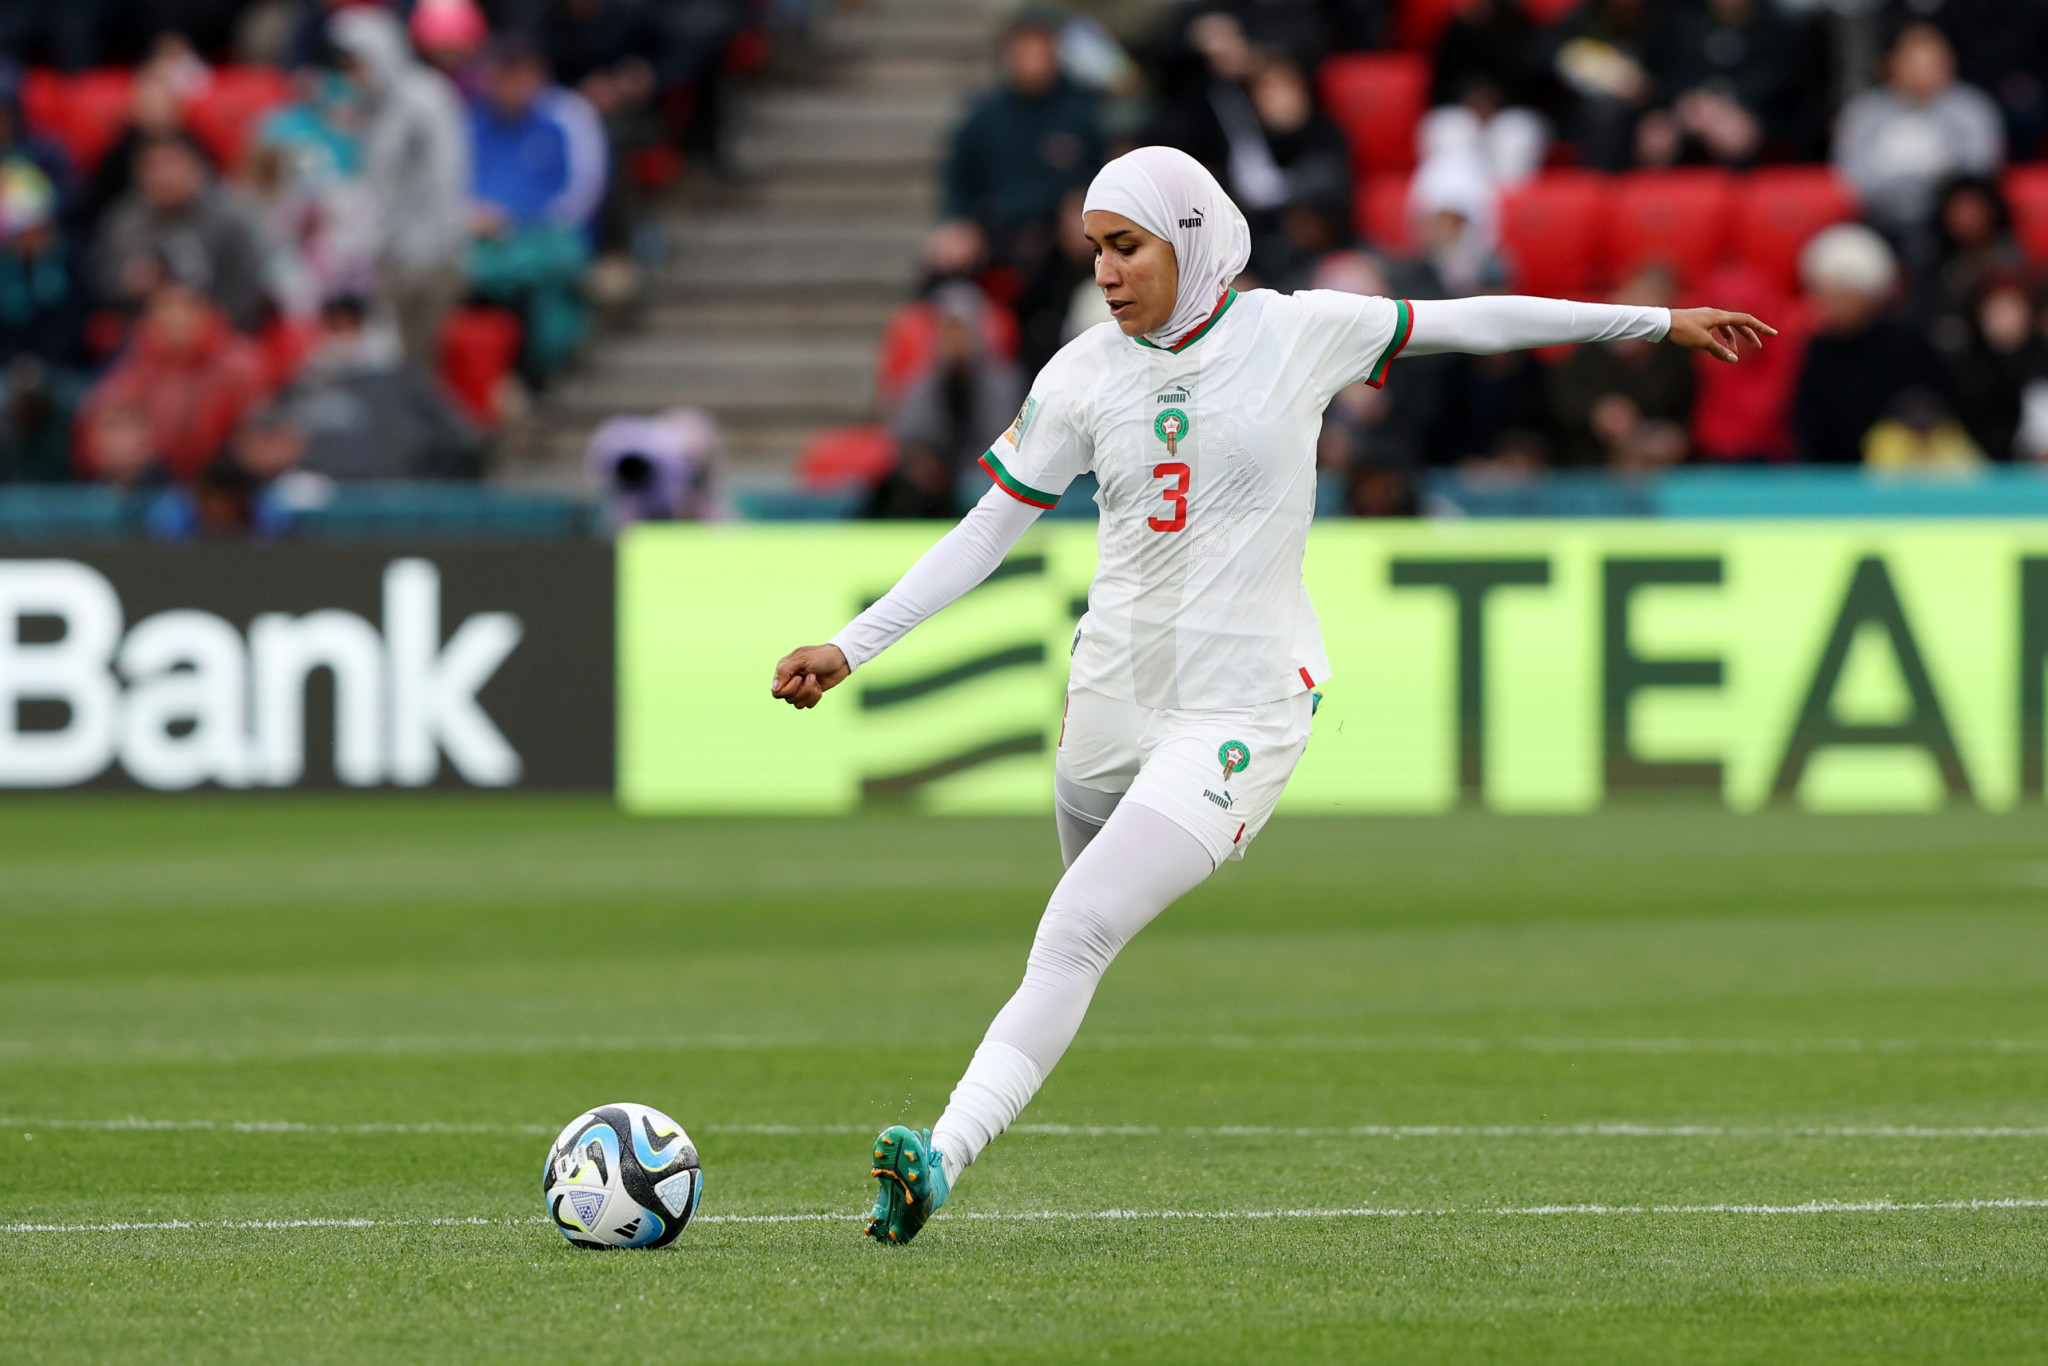 Nouhaila Benzina became the first player to wear a hijab at the FIFA Women's World Cup while playing for Morocco against South Korea ©Getty Images